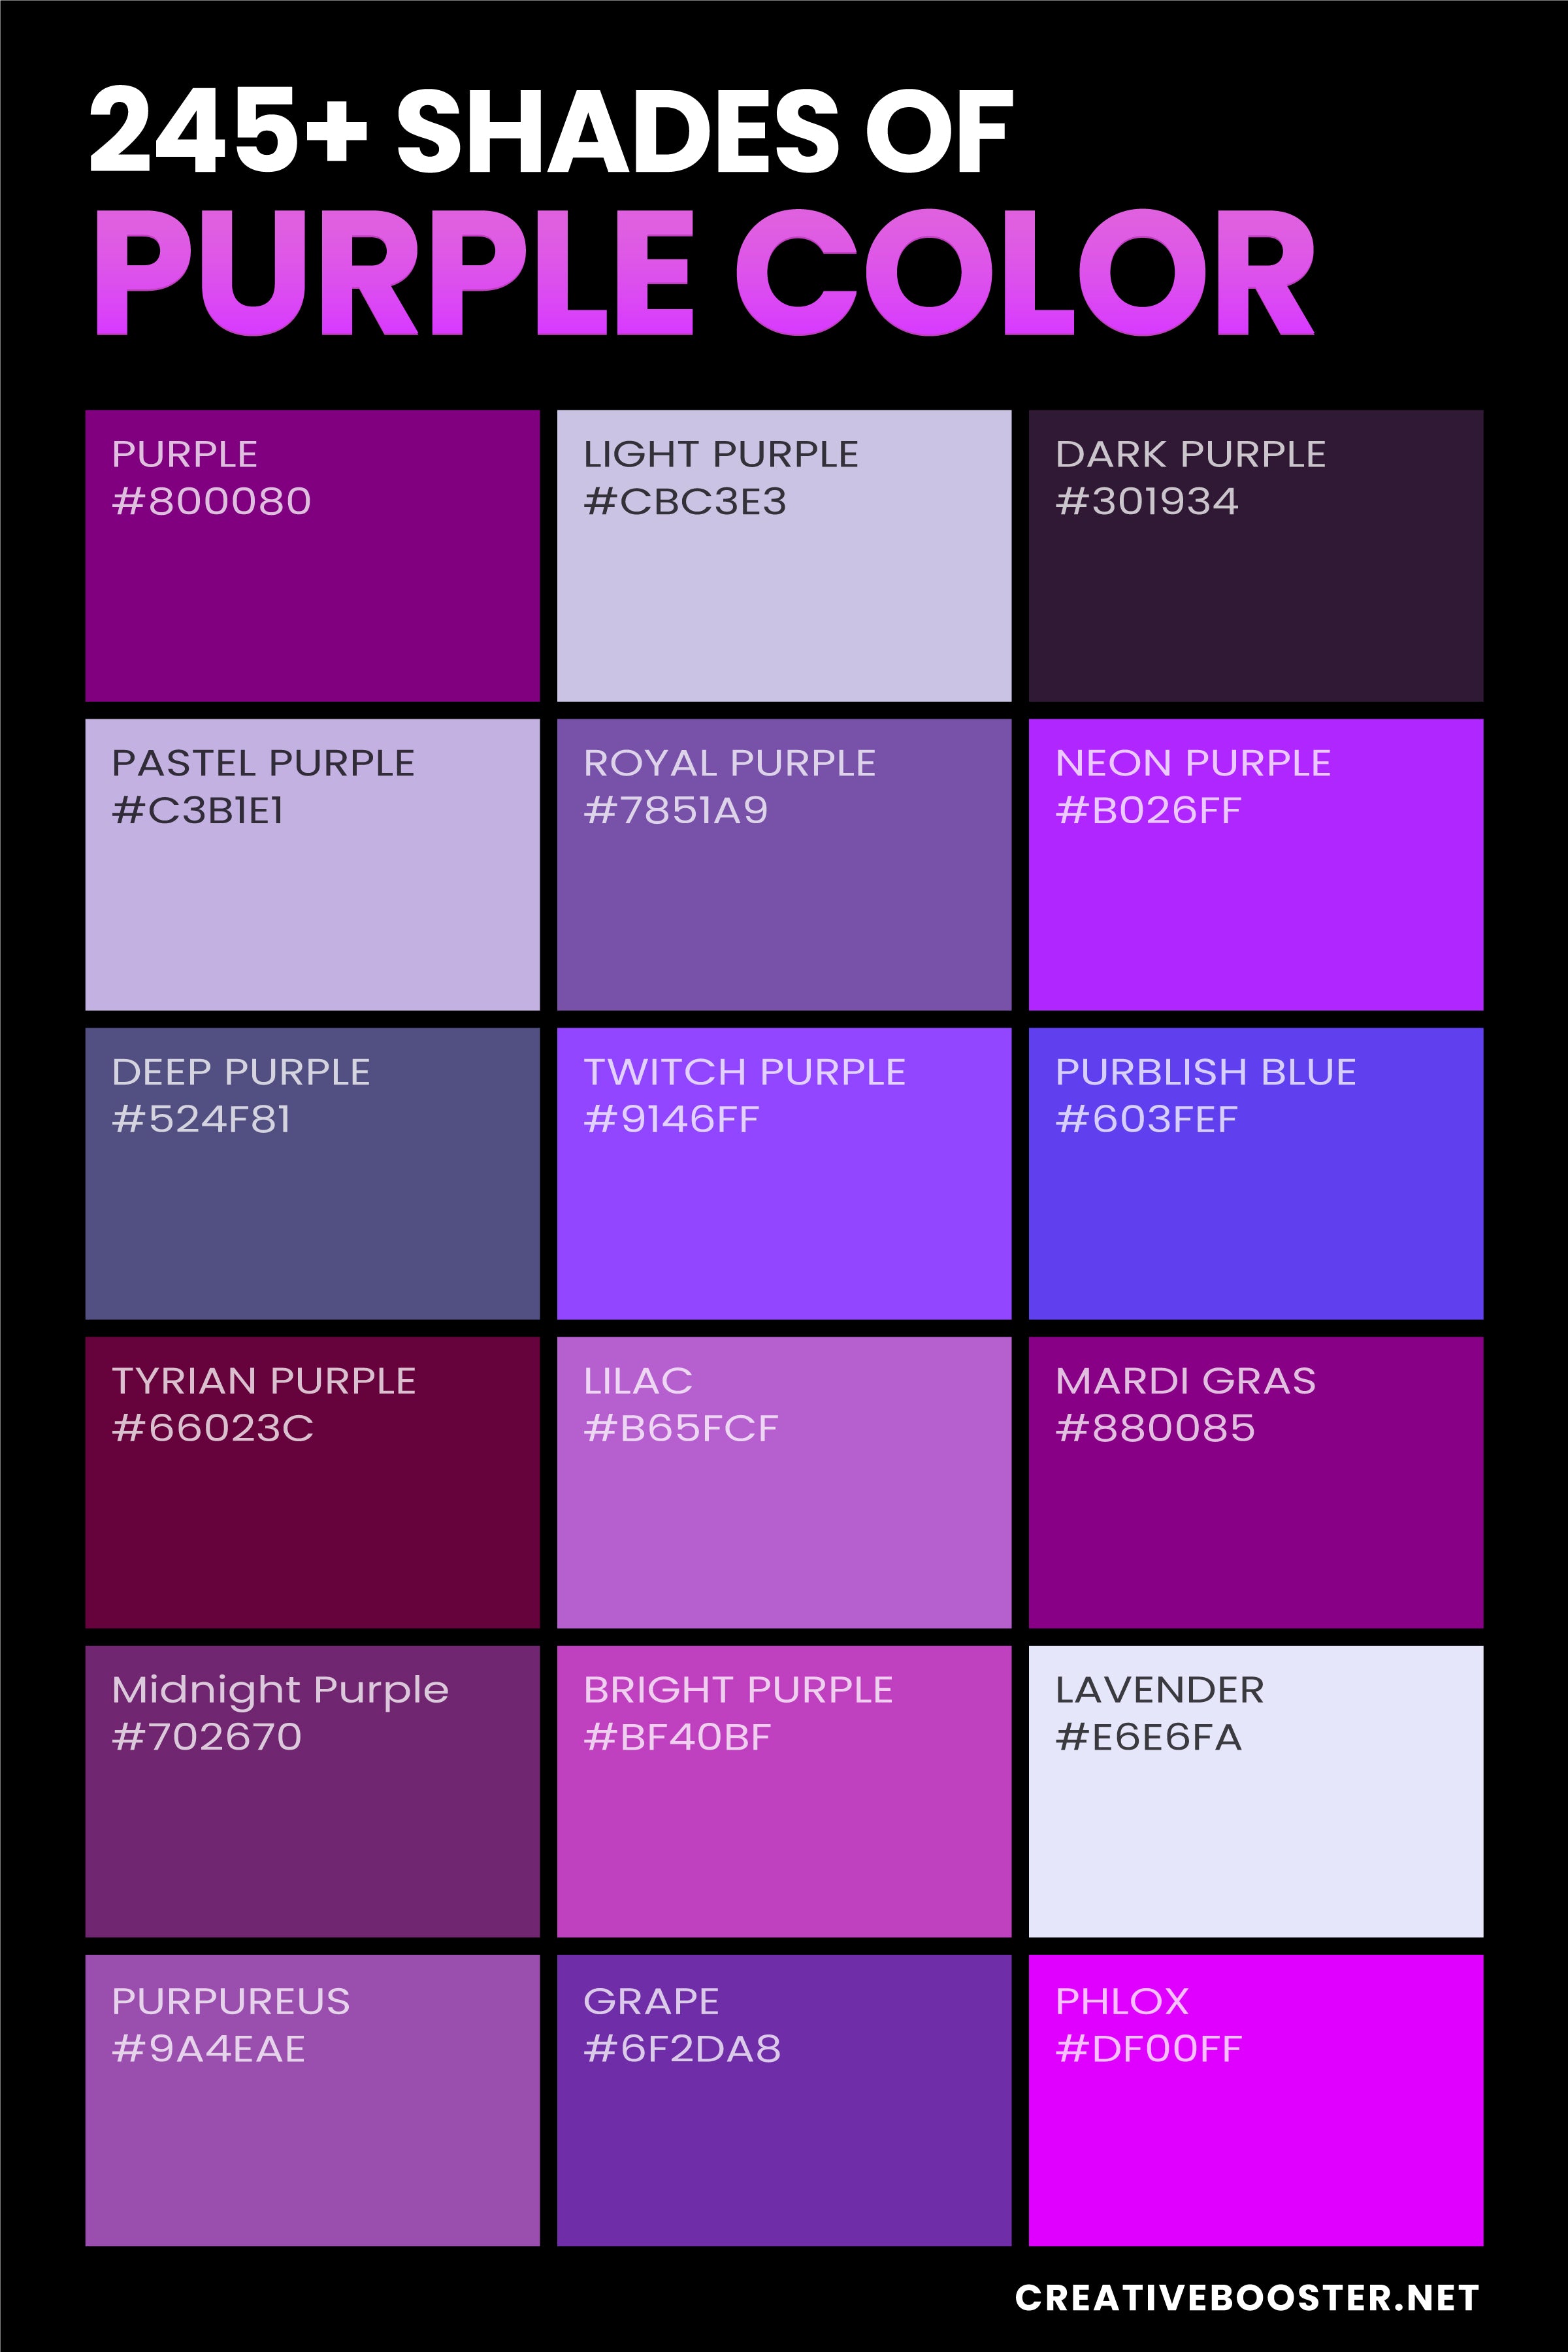 Shades-of-Purple-Color-Chart-with-Namex-and-Hex-Color-Codes-Tall